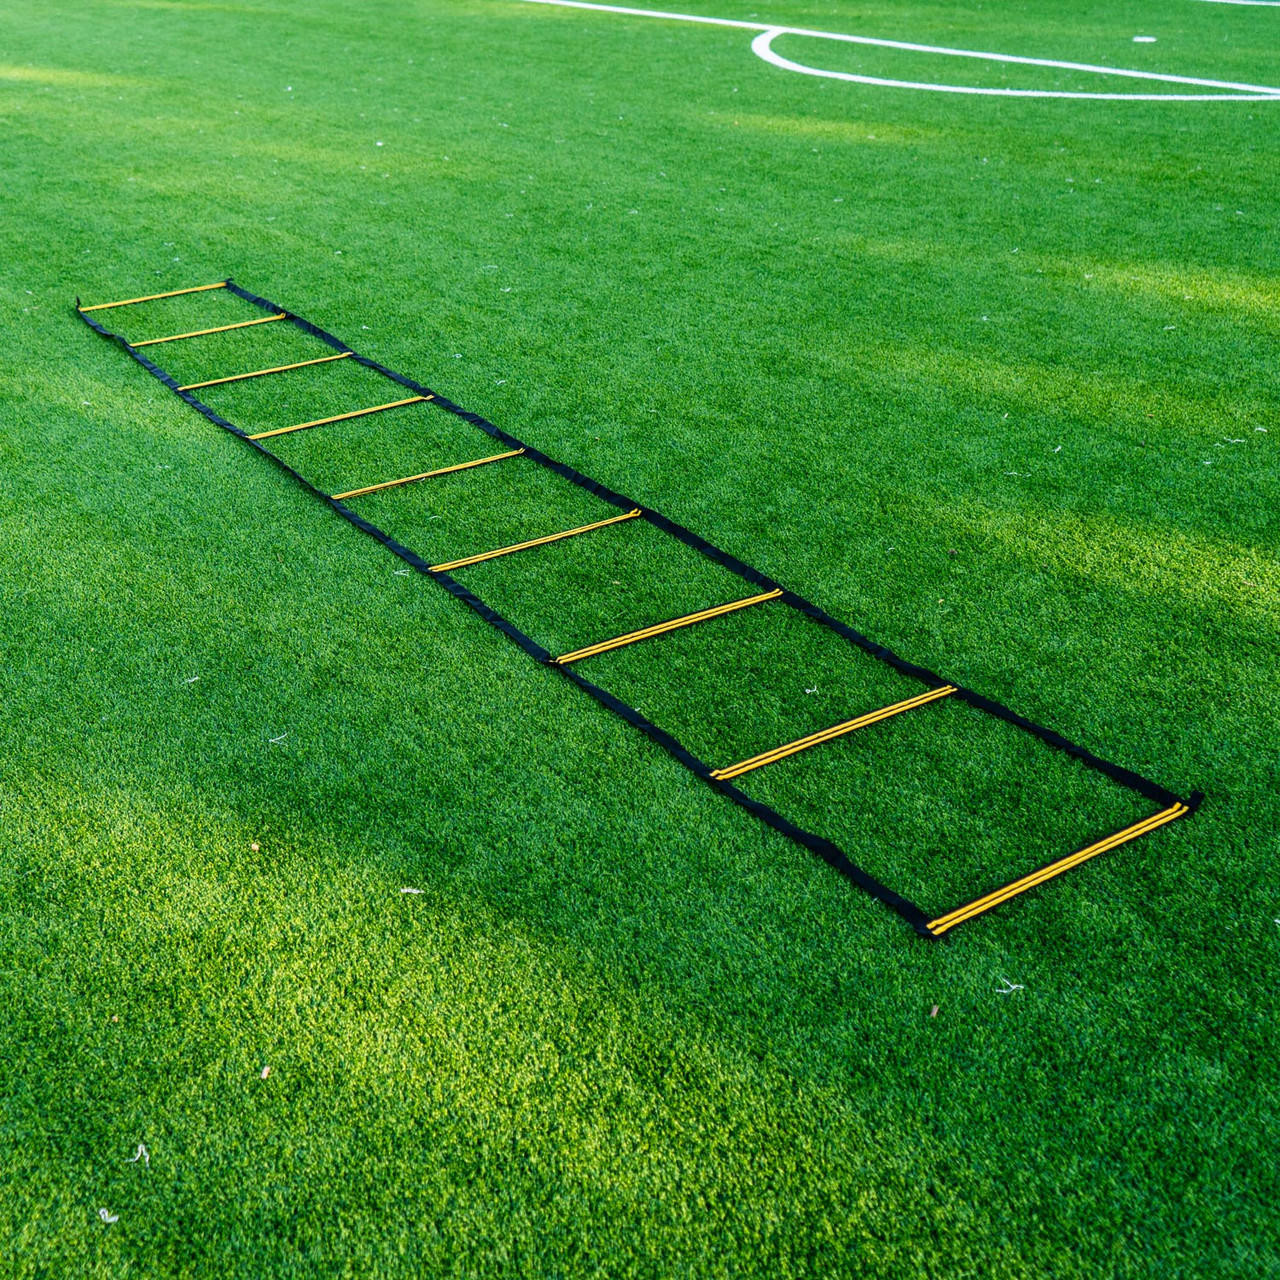 Source Octagon Agility Rings Ladder Speed Training Equipment For Soccer  football sport accessories on m.